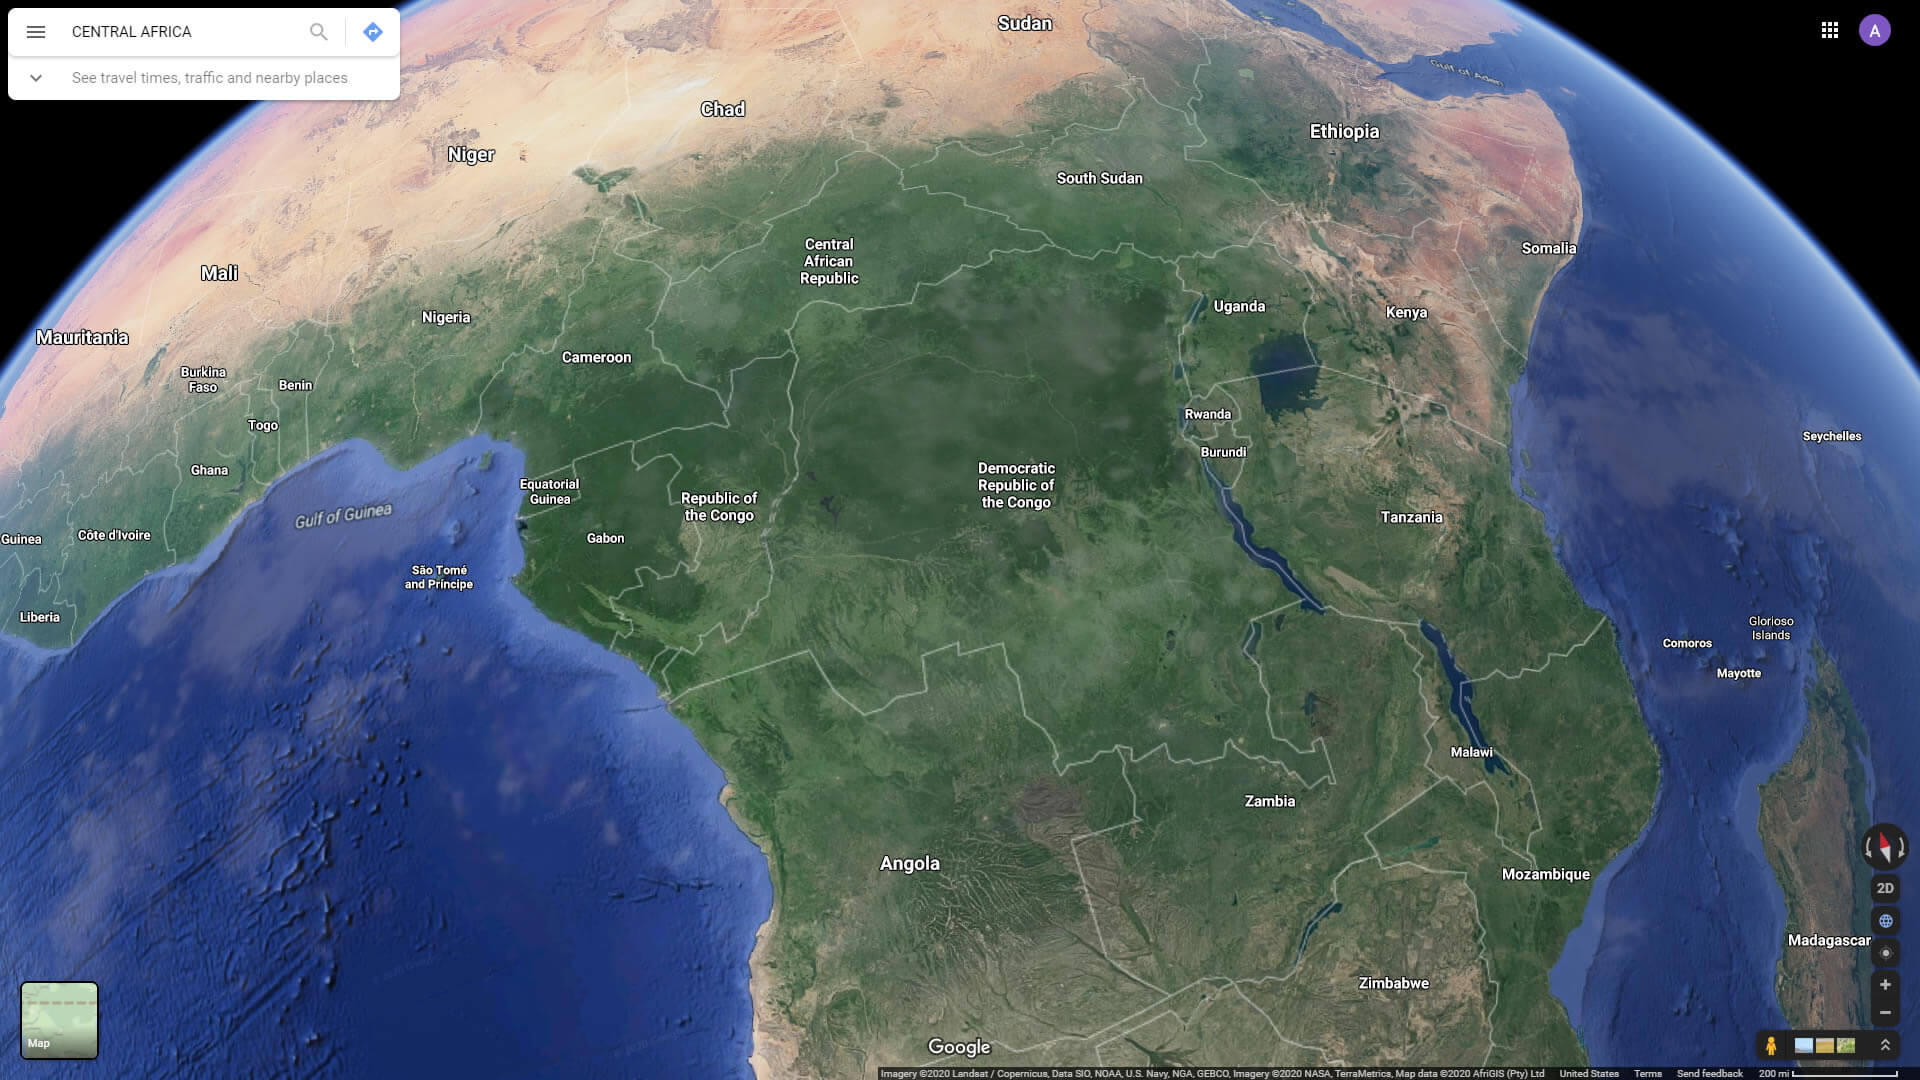 Central Africa Satellite View with Countries